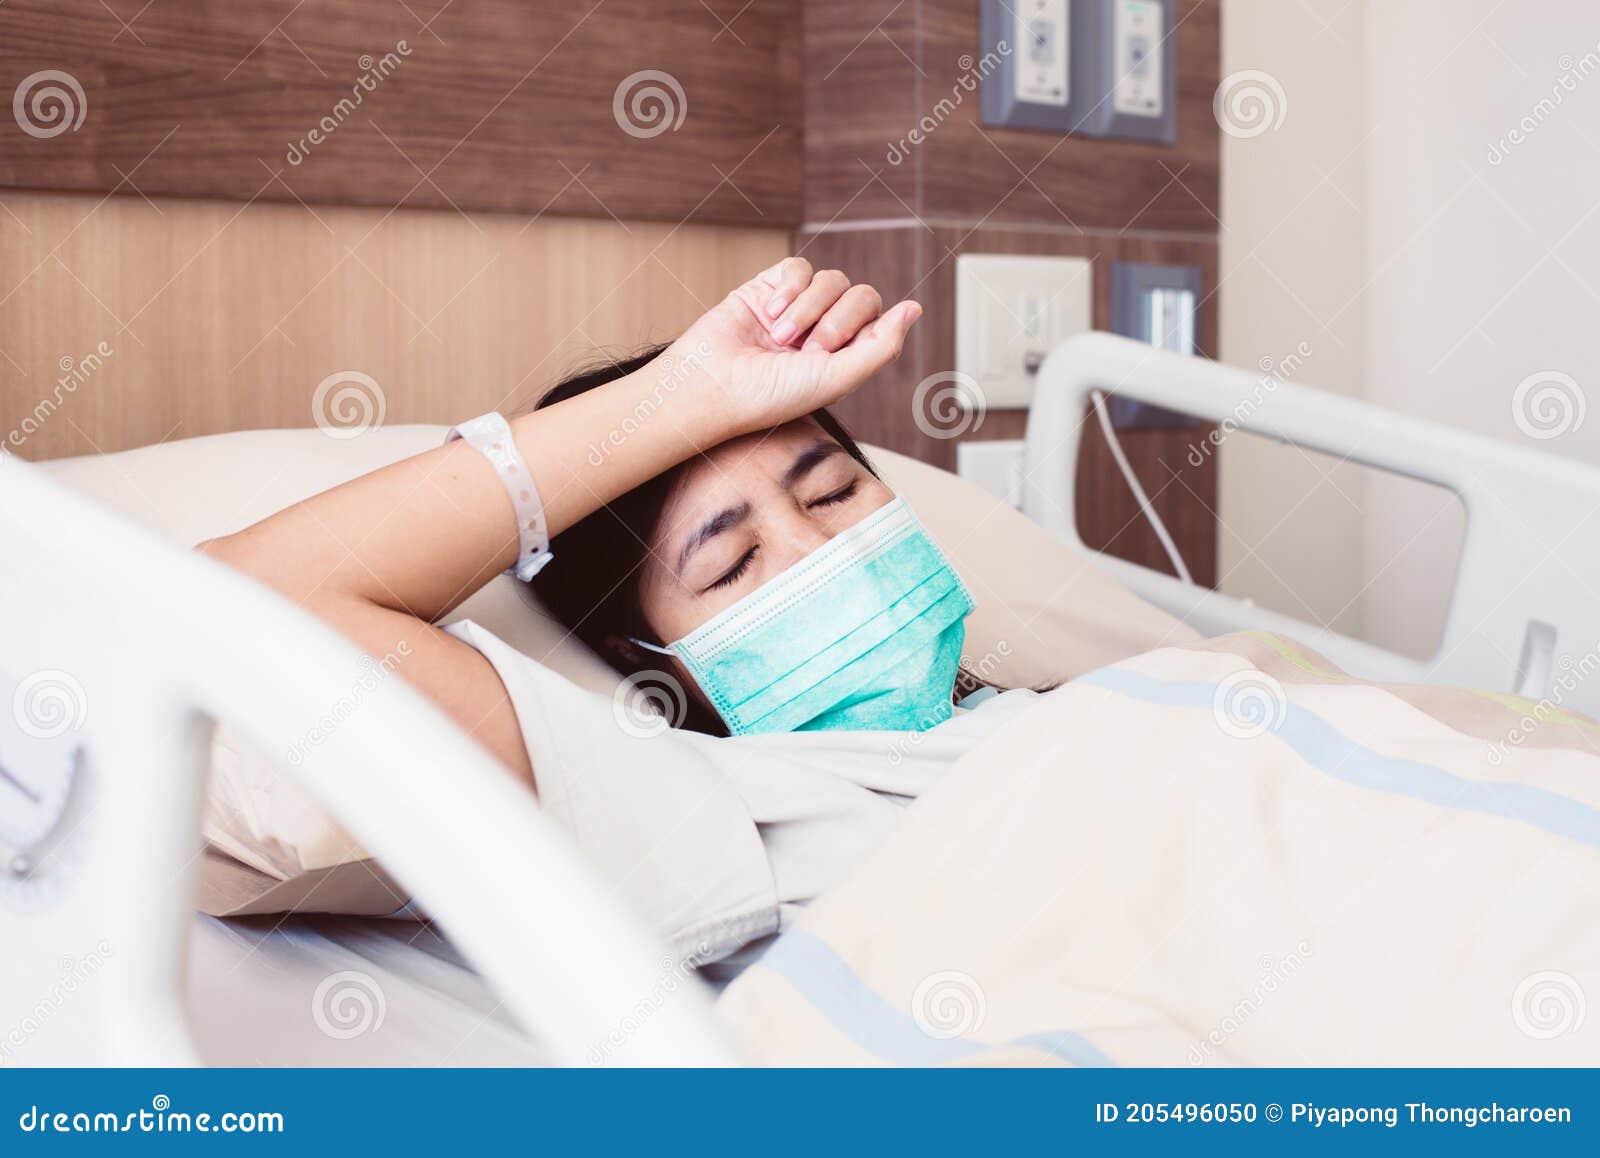 patient asian woman having a headache or migraine severe in hospital,dengue fever